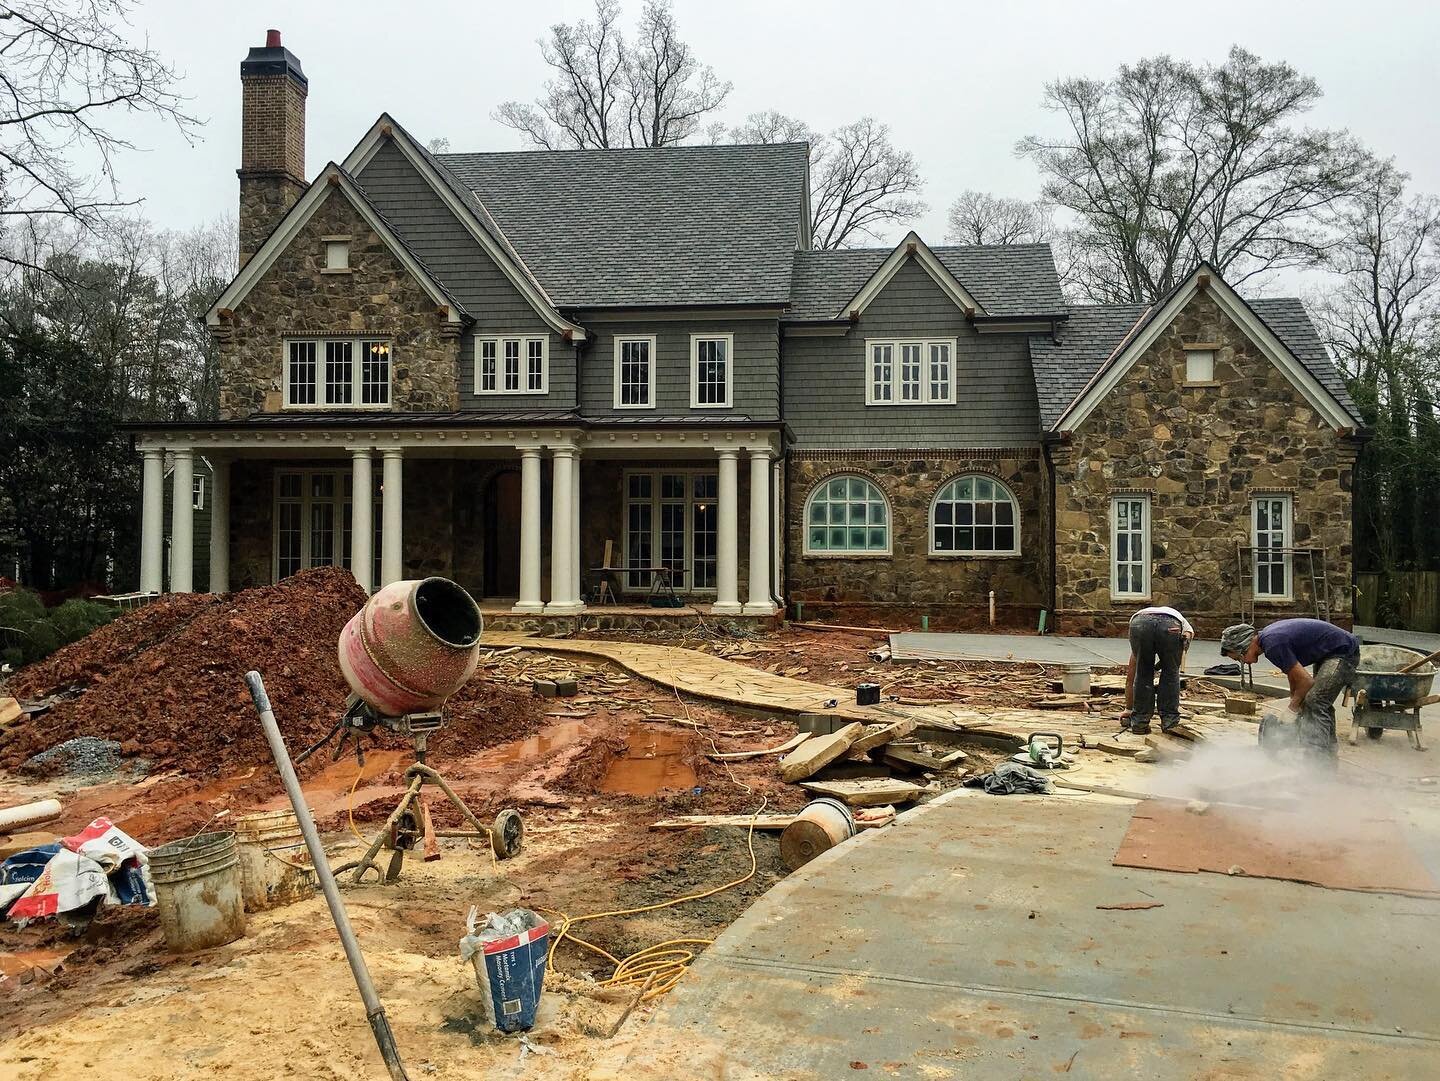 Who doesn&rsquo;t love a great transformation?! We designed a chestnut crab orchard stone walkway &amp; a driveway apron lined by brown and tan crab orchard cobblestone for this lovely home. We love how well these stones complement each other, and ho